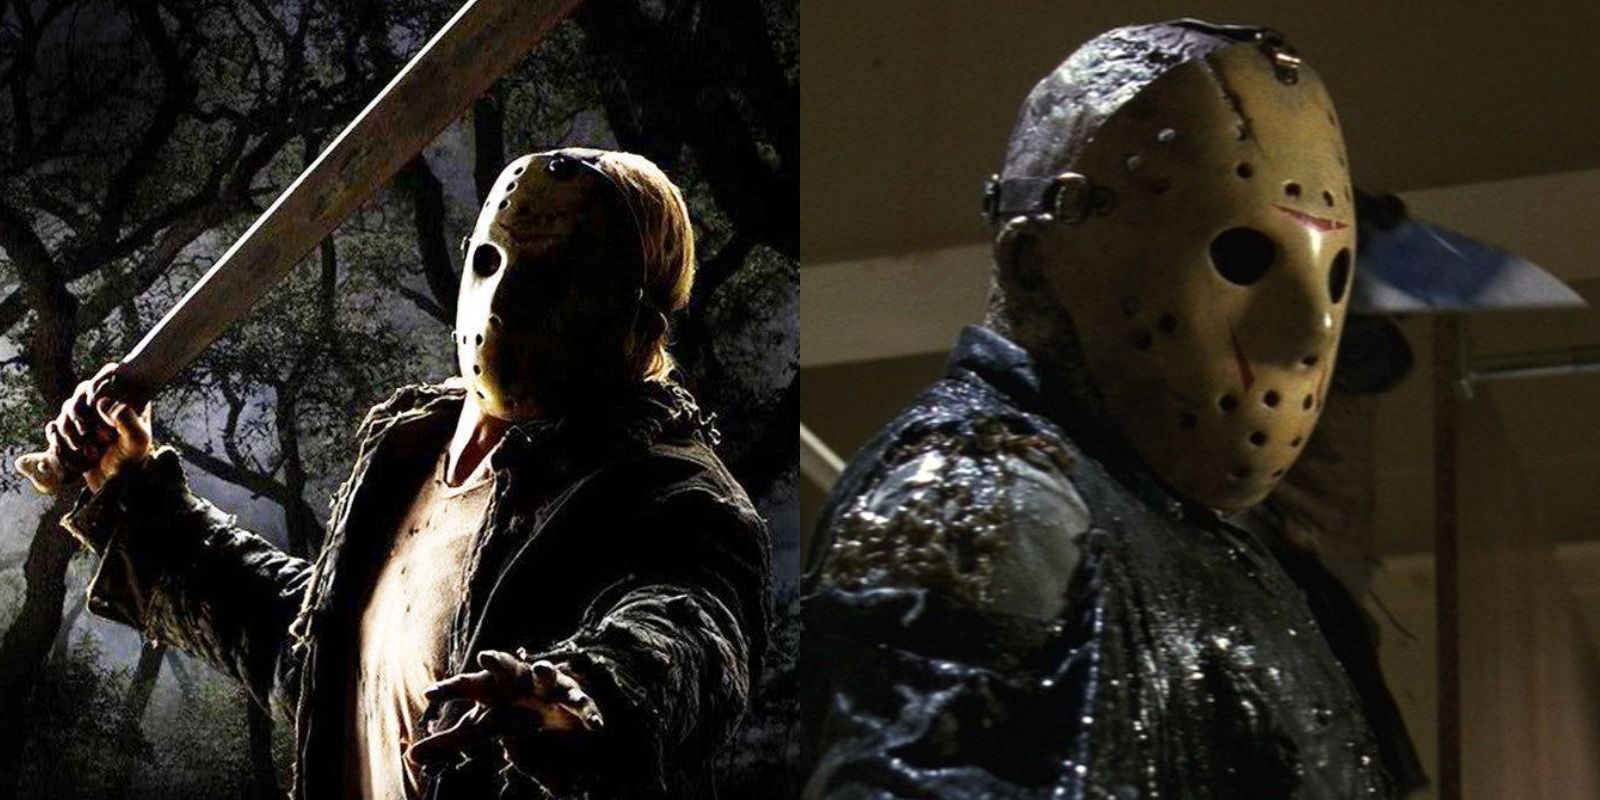 The Only Two Friday The 13th Movies Where Jason Kills Exactly 13 Victims